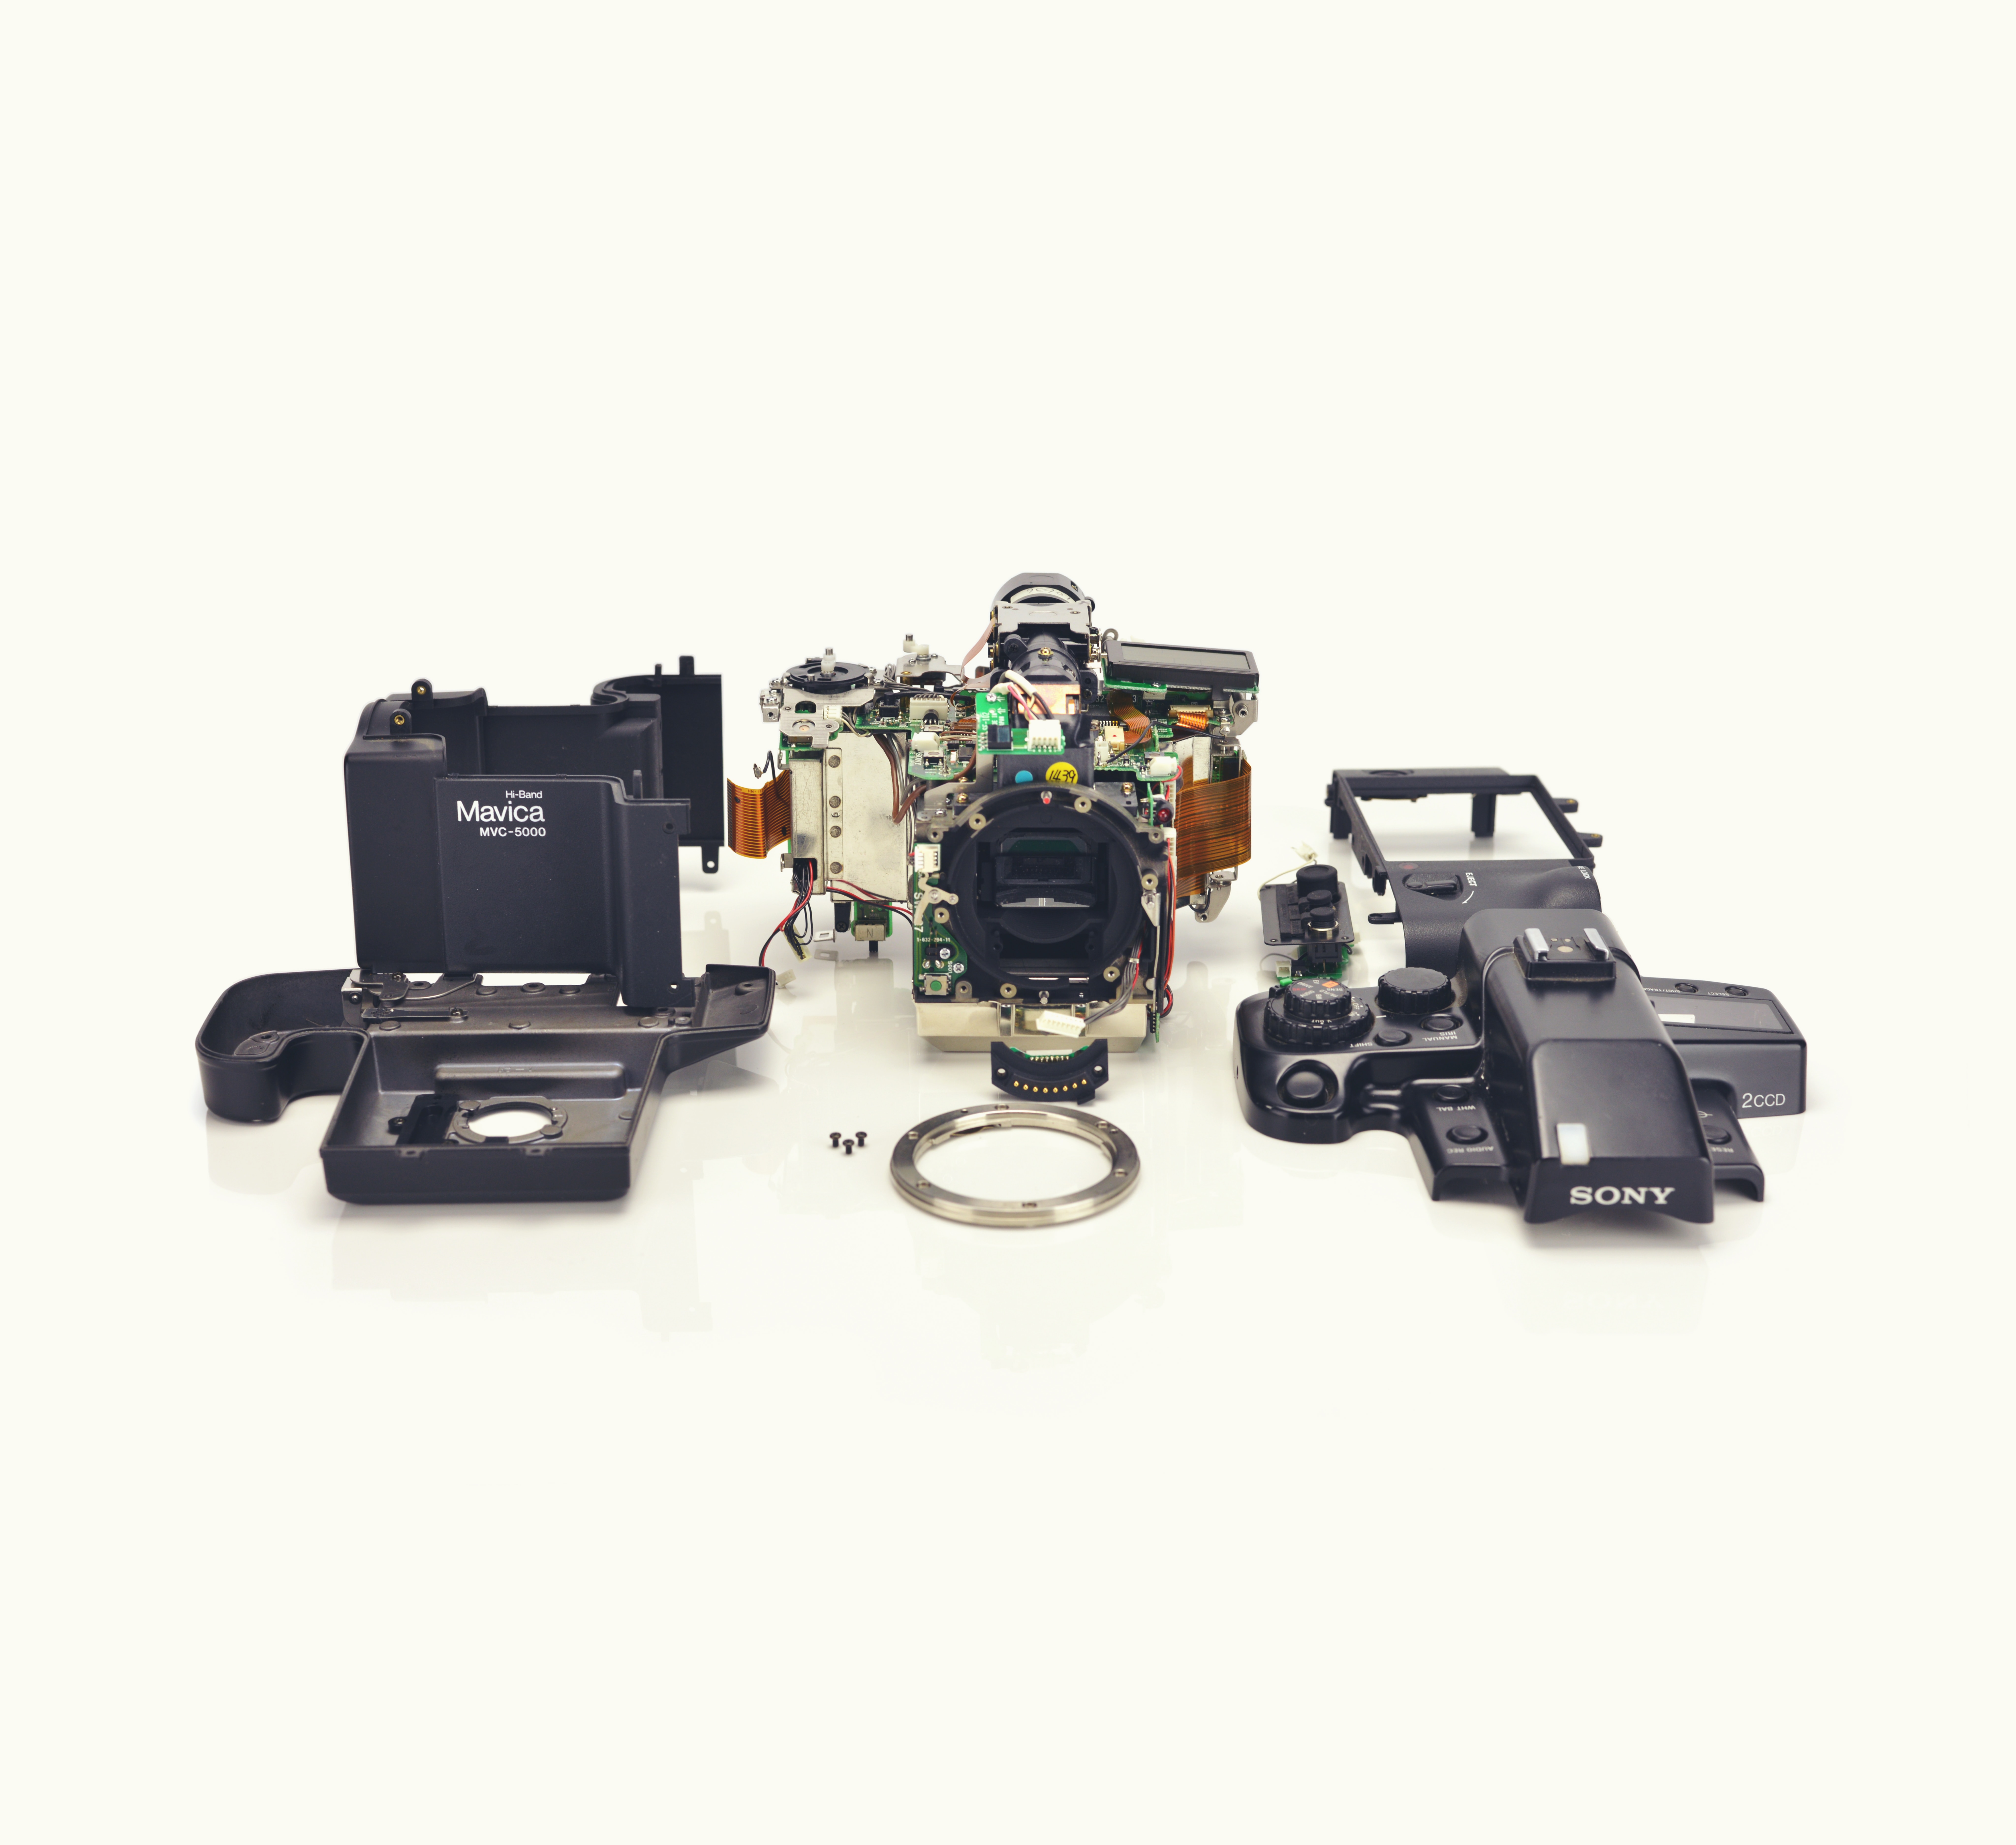 General 8194x7499 disassembly camera simple background white background Sony parts technology minimalism